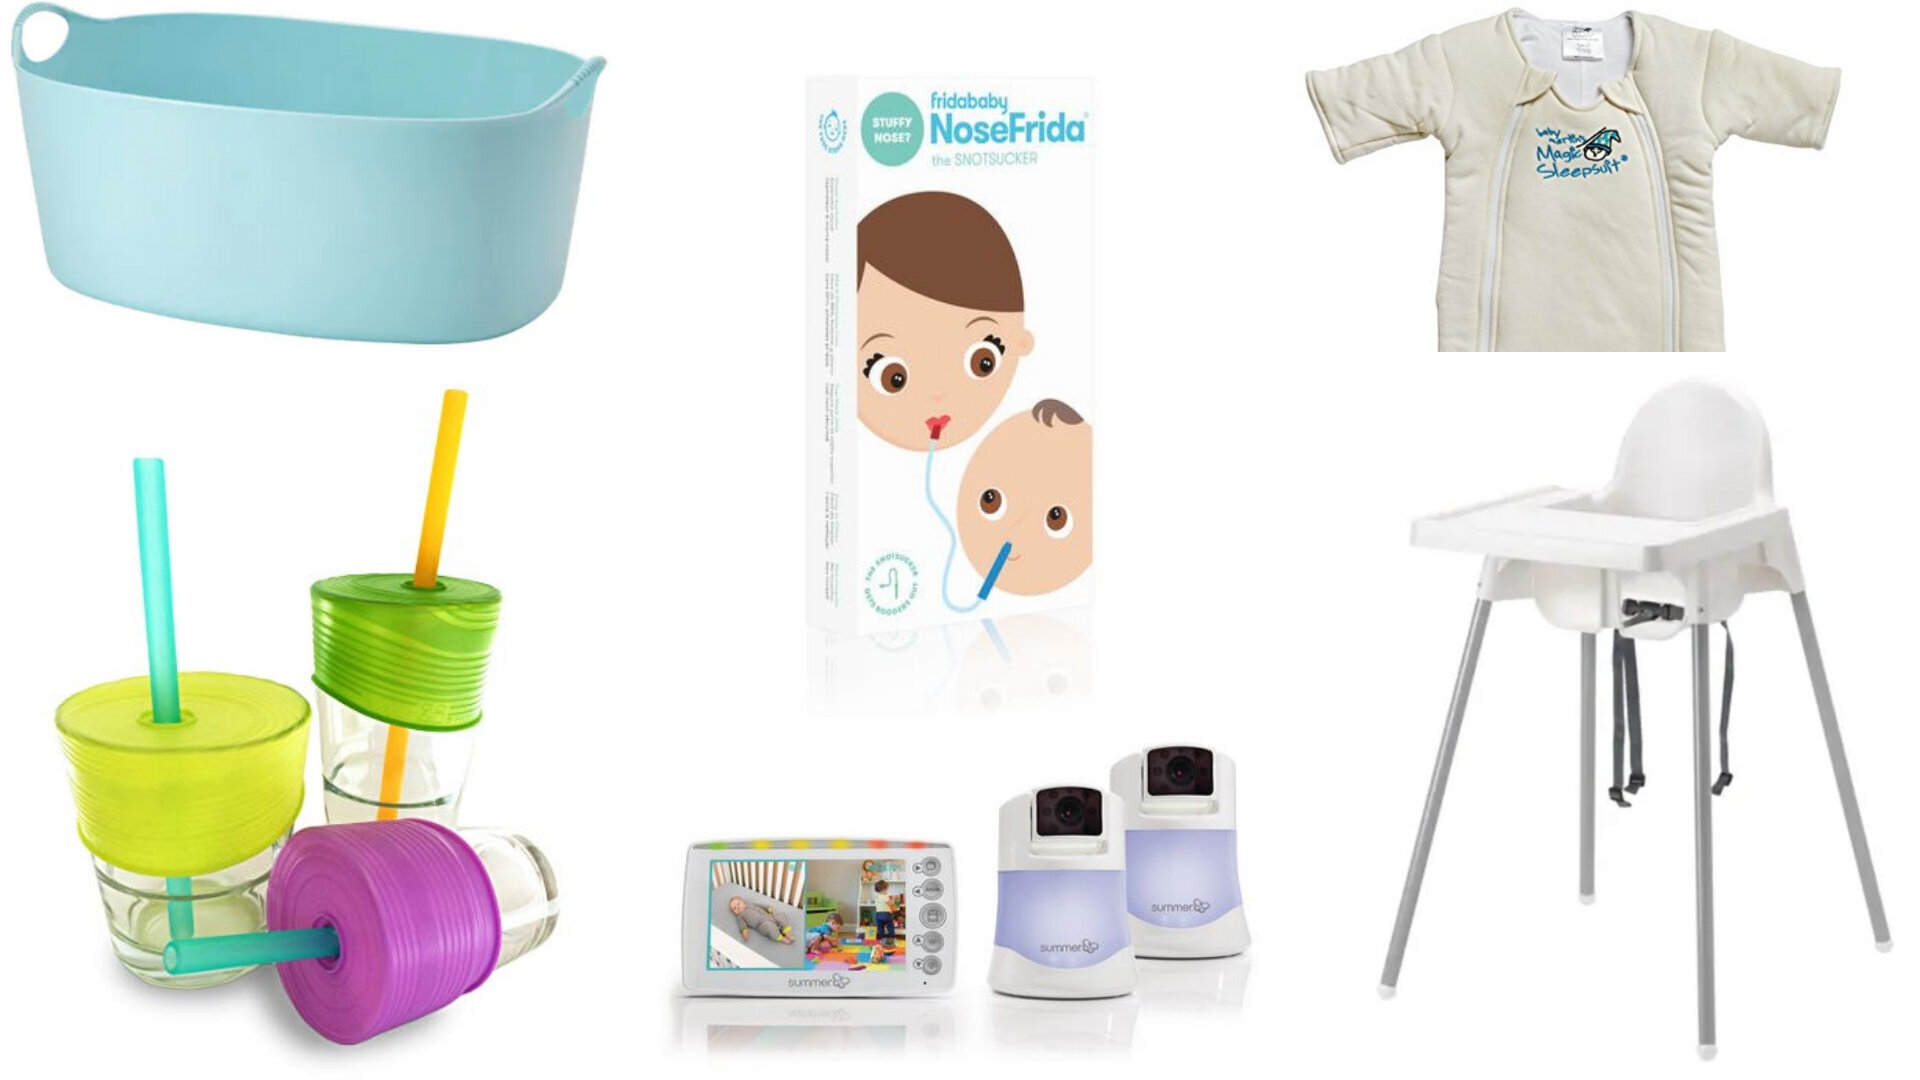 best baby products